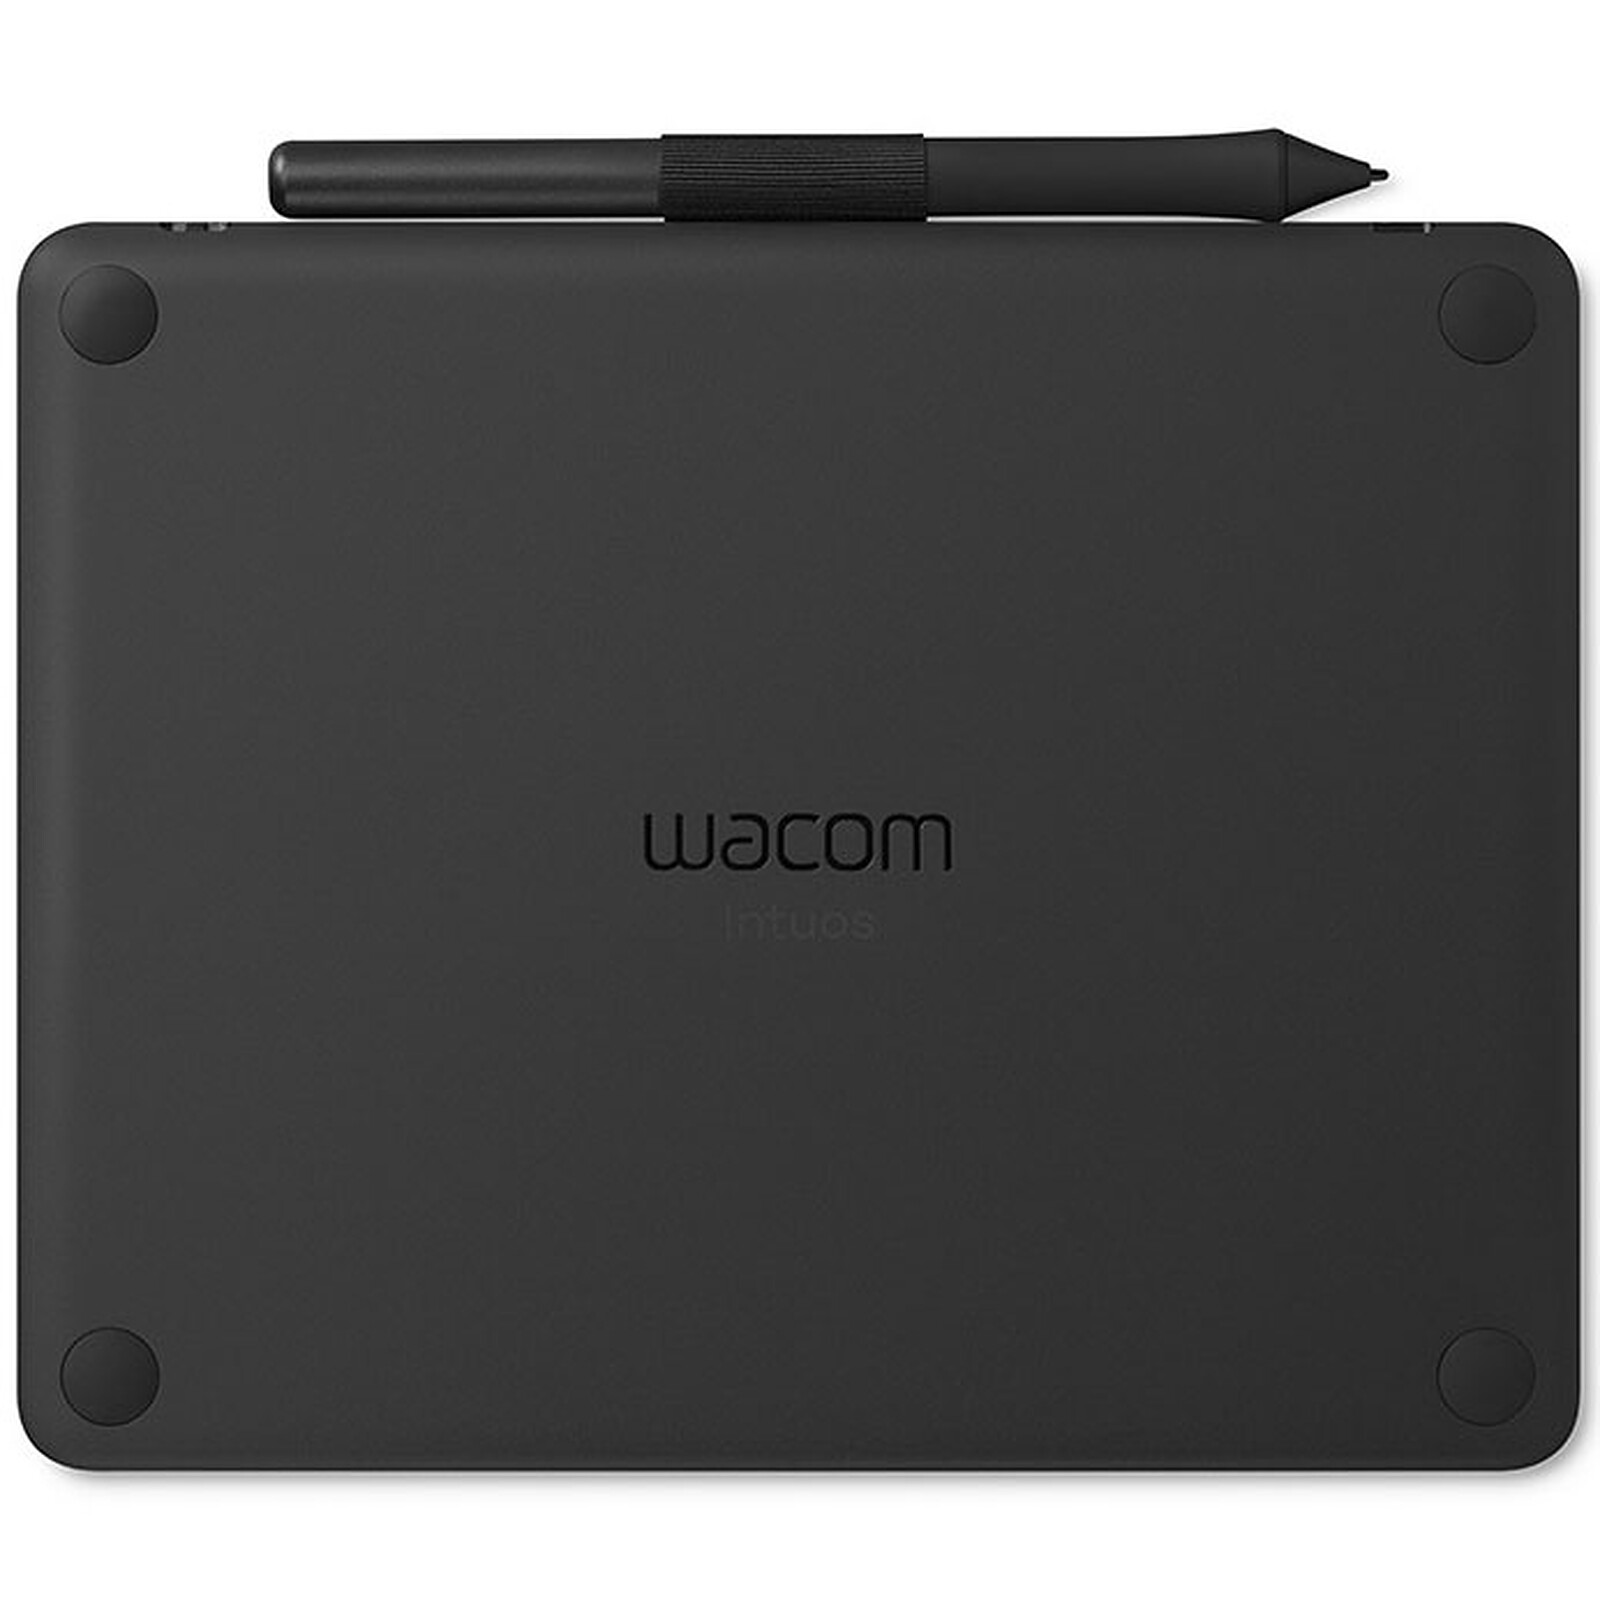 Wacom Intuos M with Bluetooth Black - Graphics tablet - LDLC 3-year warranty